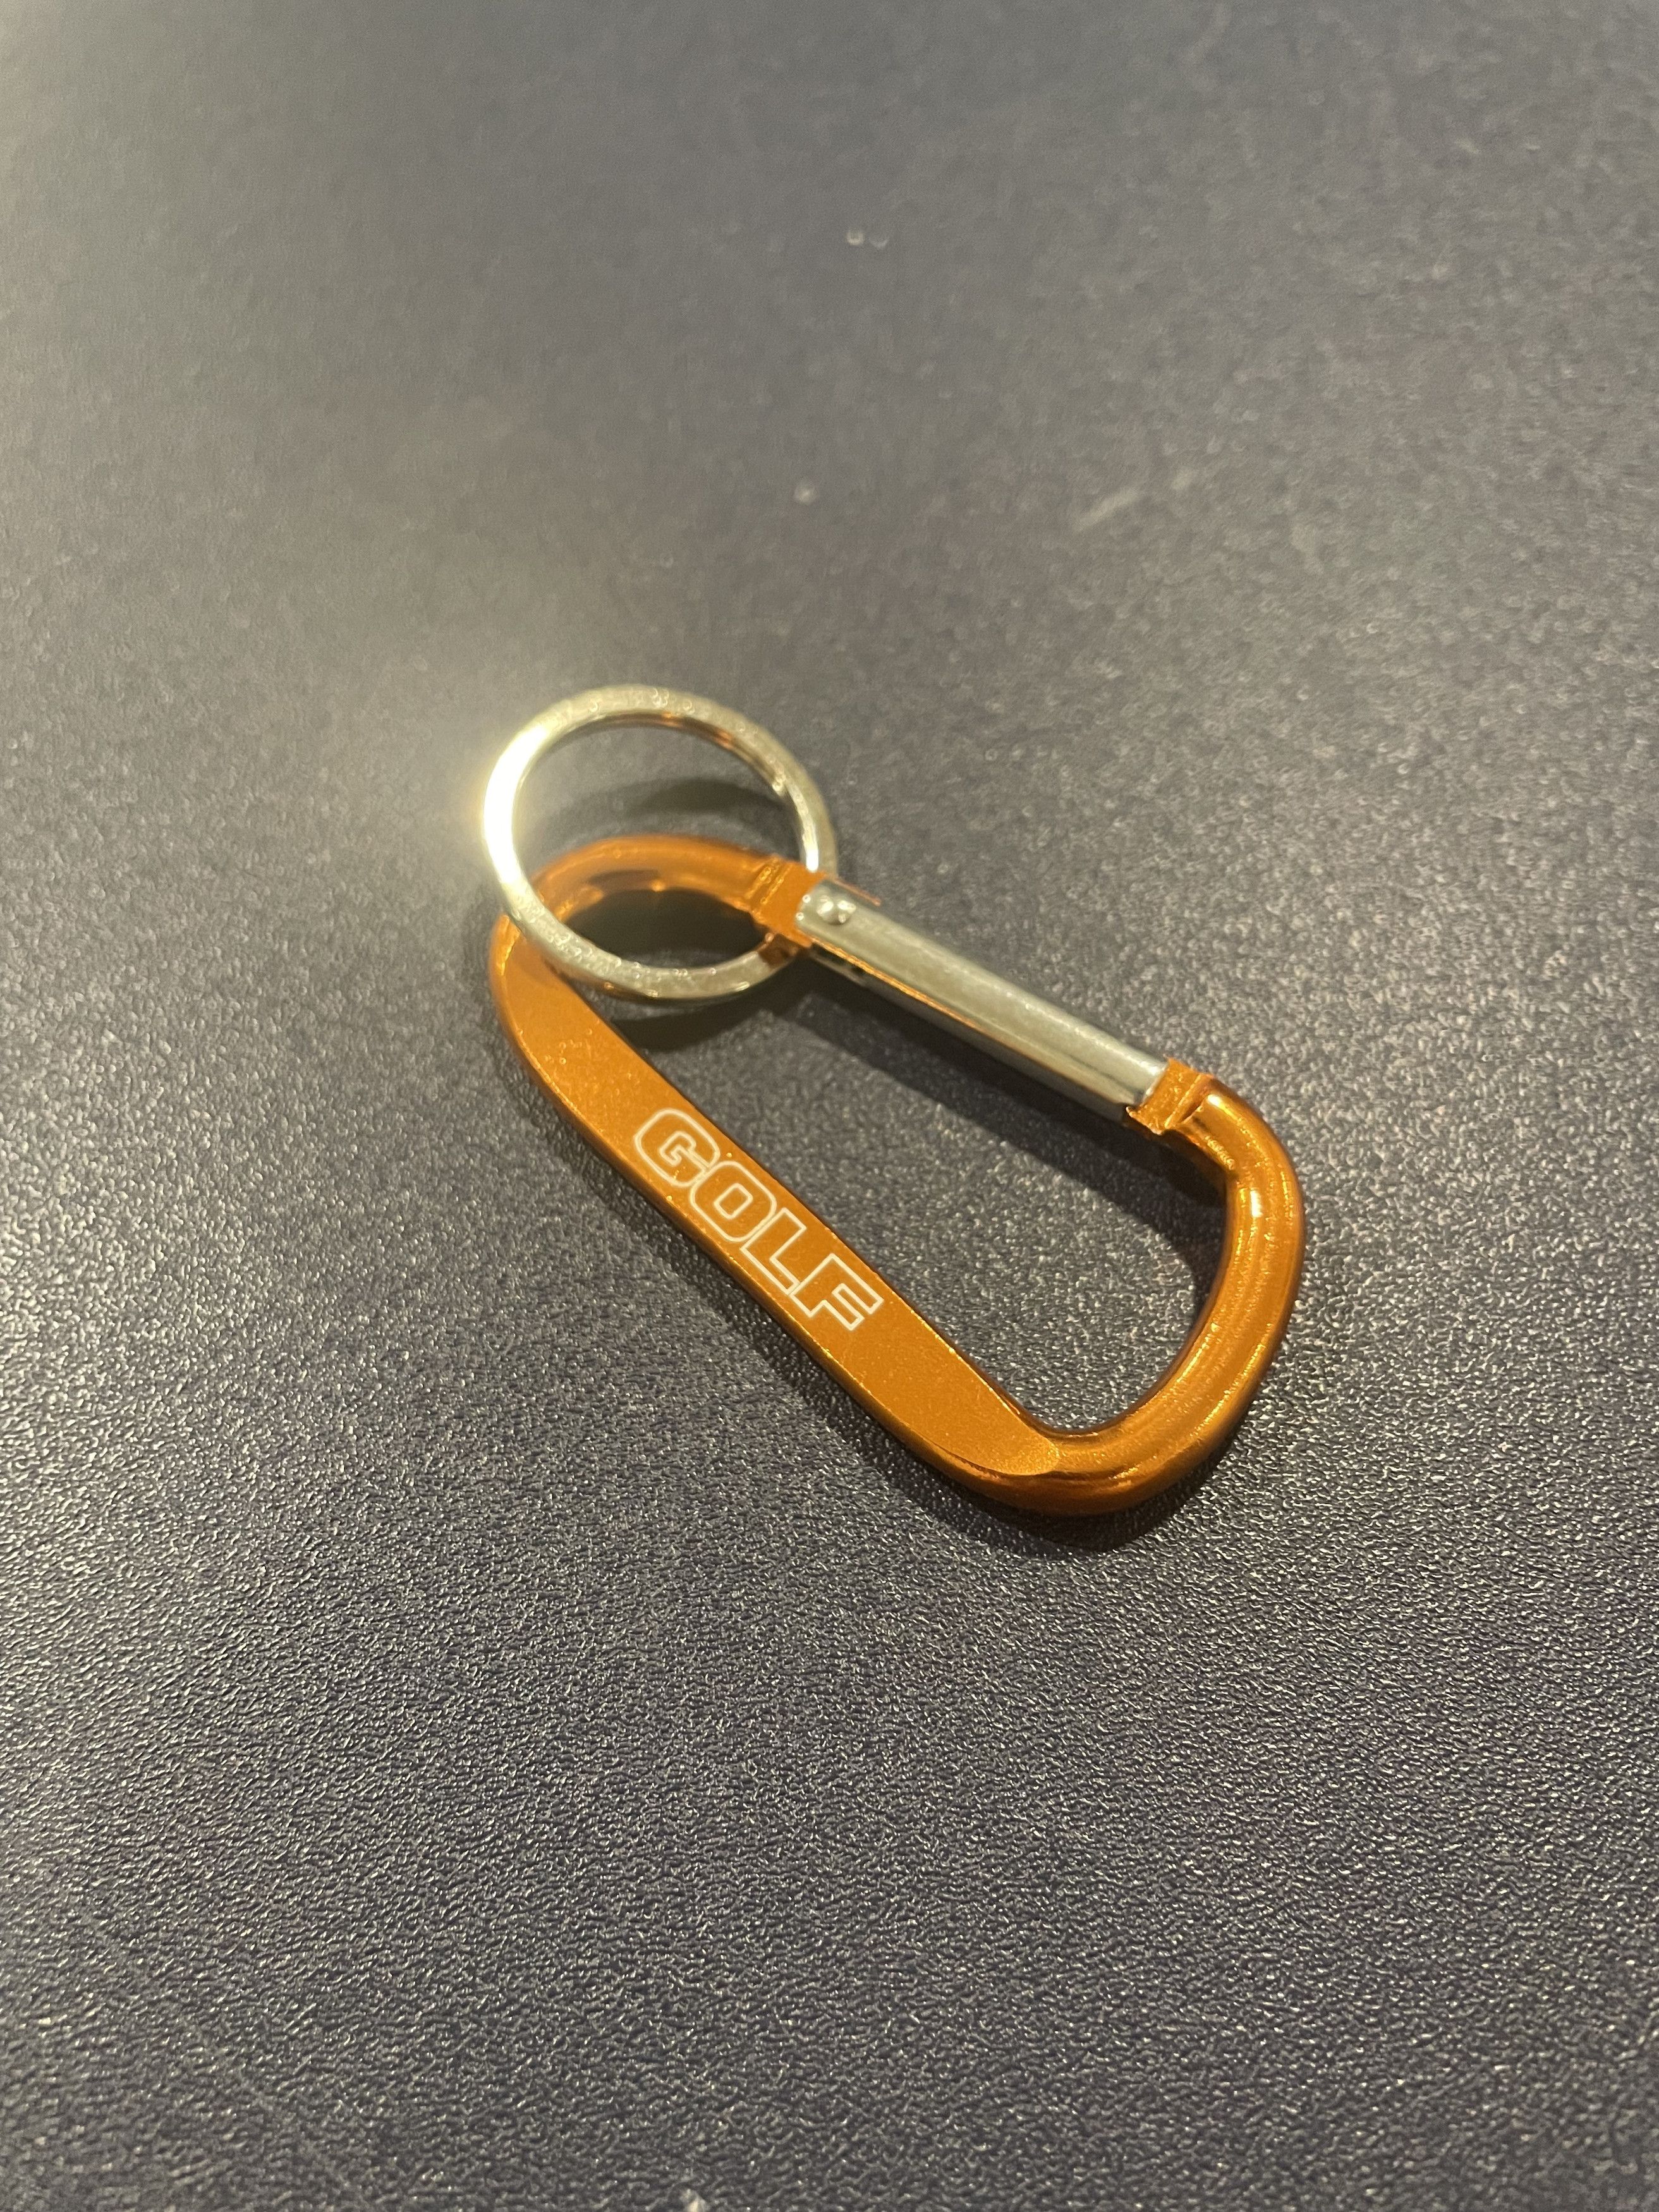 Golf Wang Golf Wang Carabiner - Orange Size ONE SIZE - 2 Preview